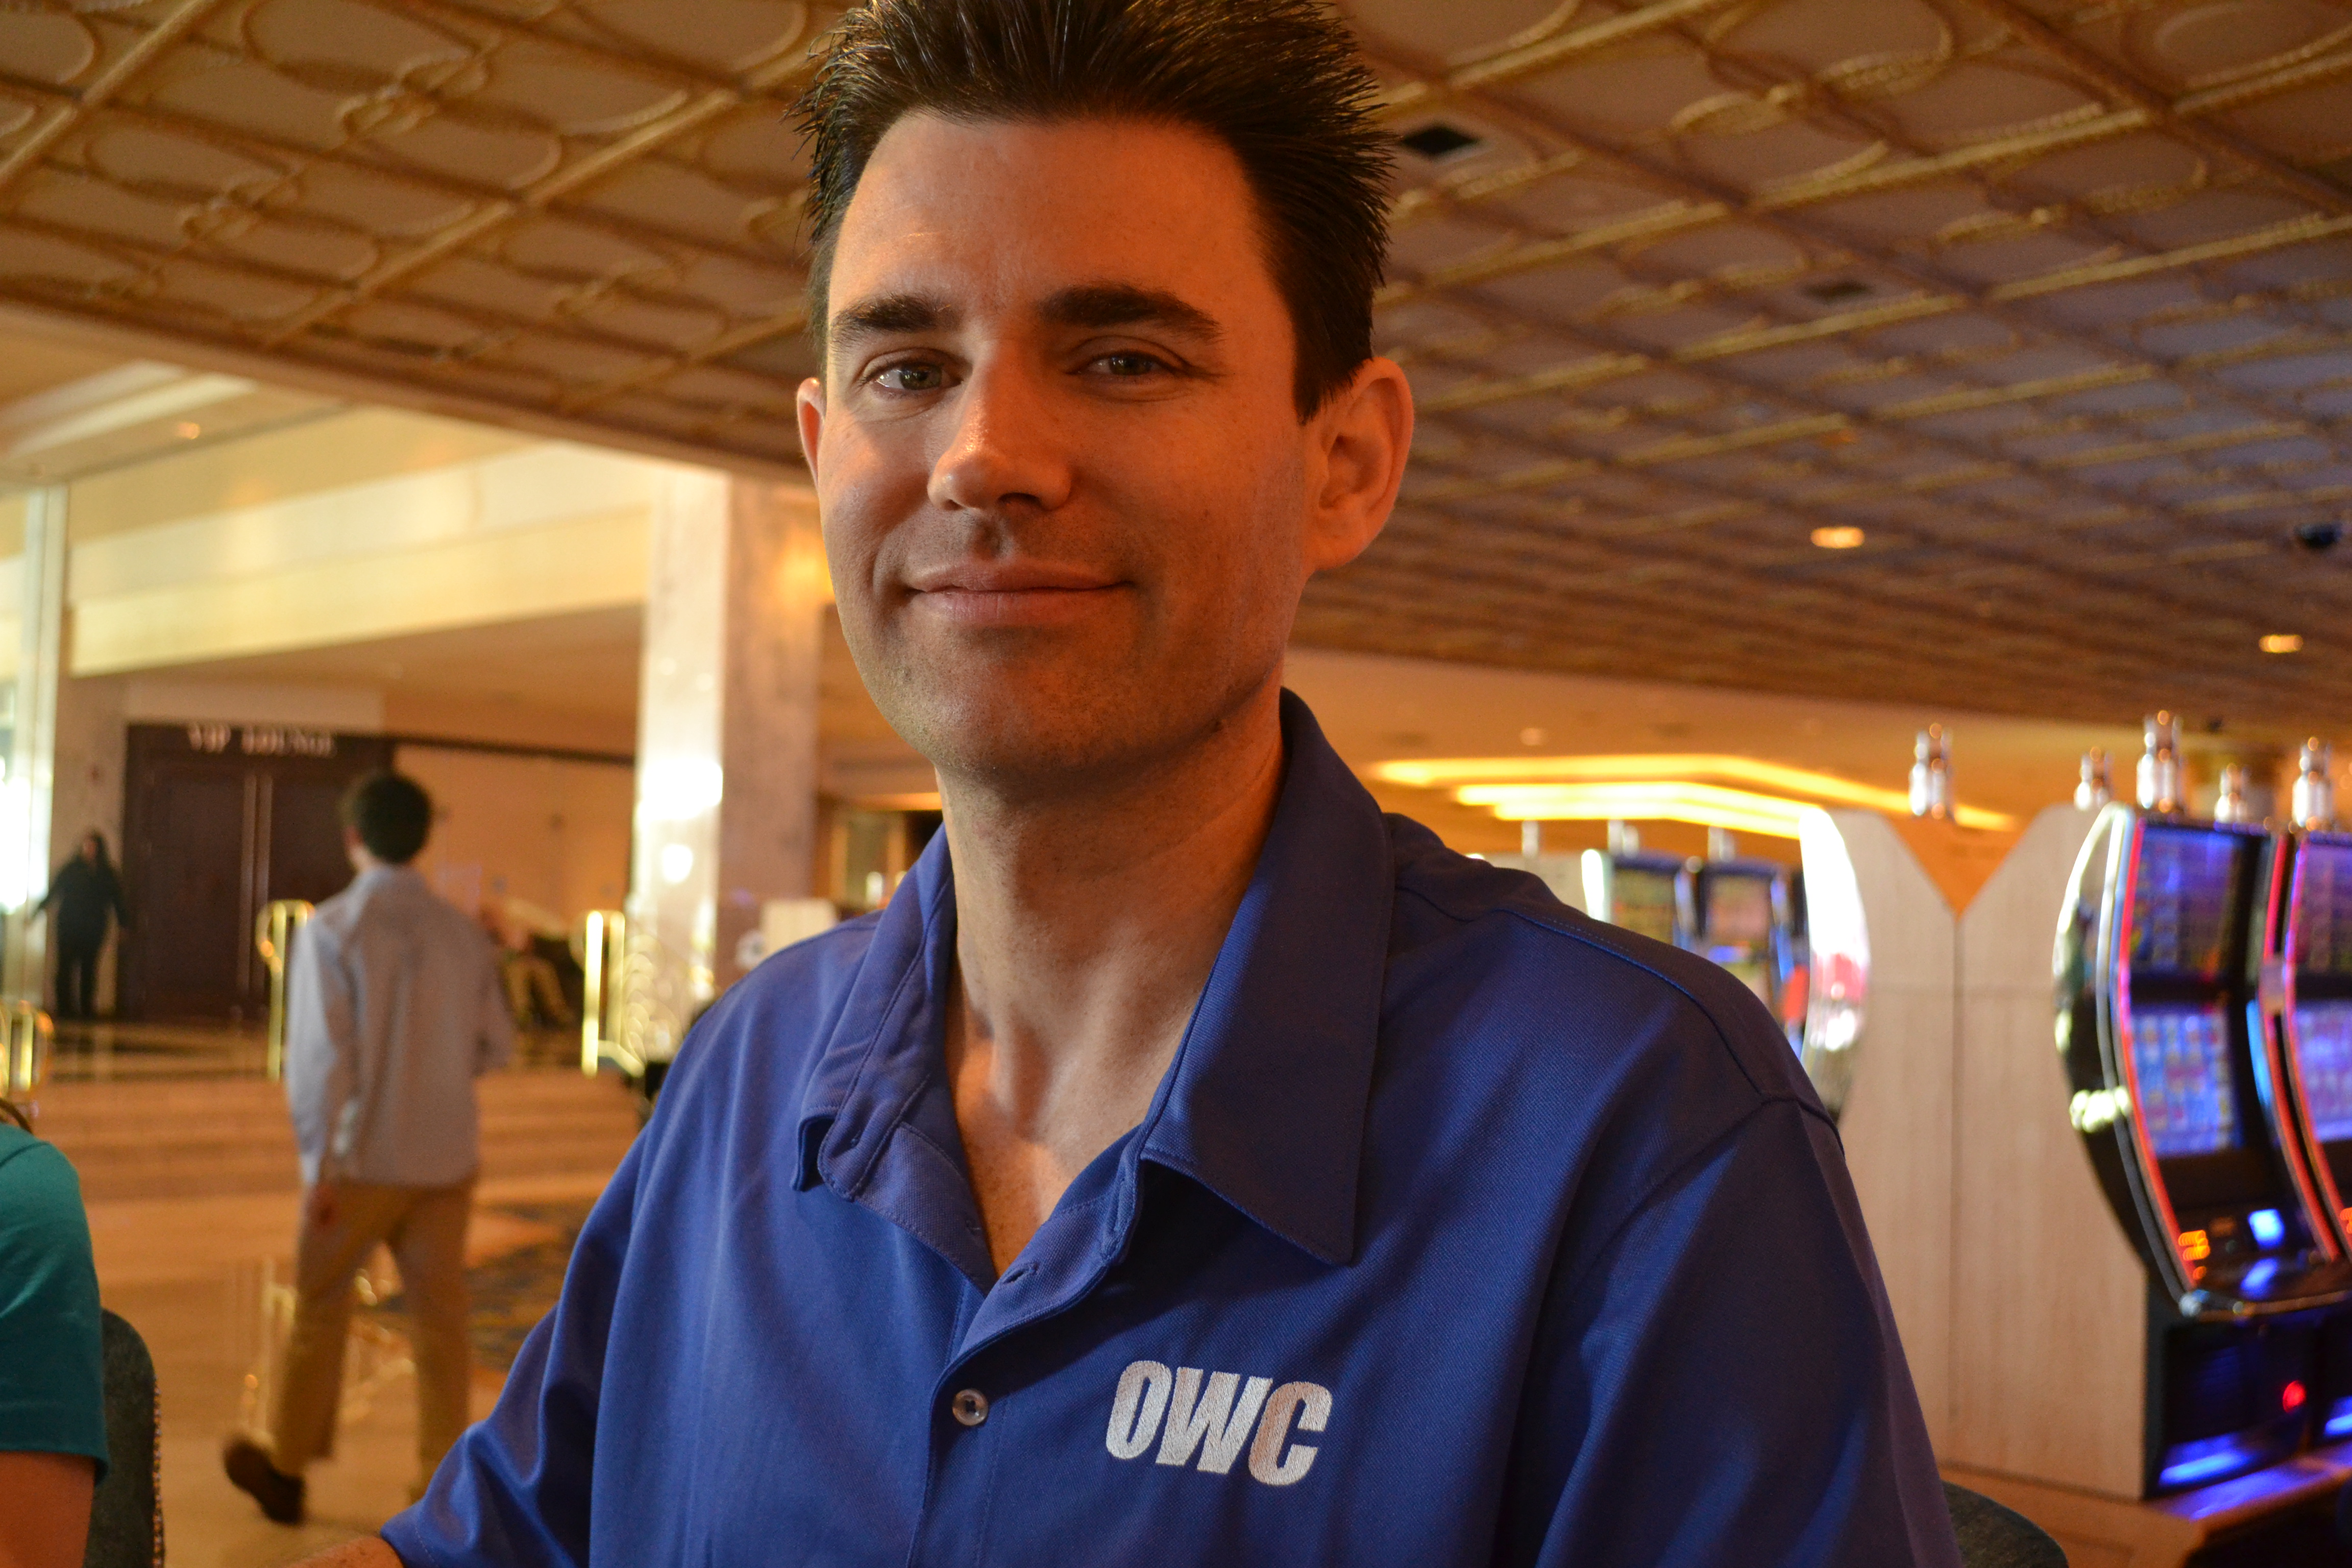 Larry O’Connor, founder of OWC